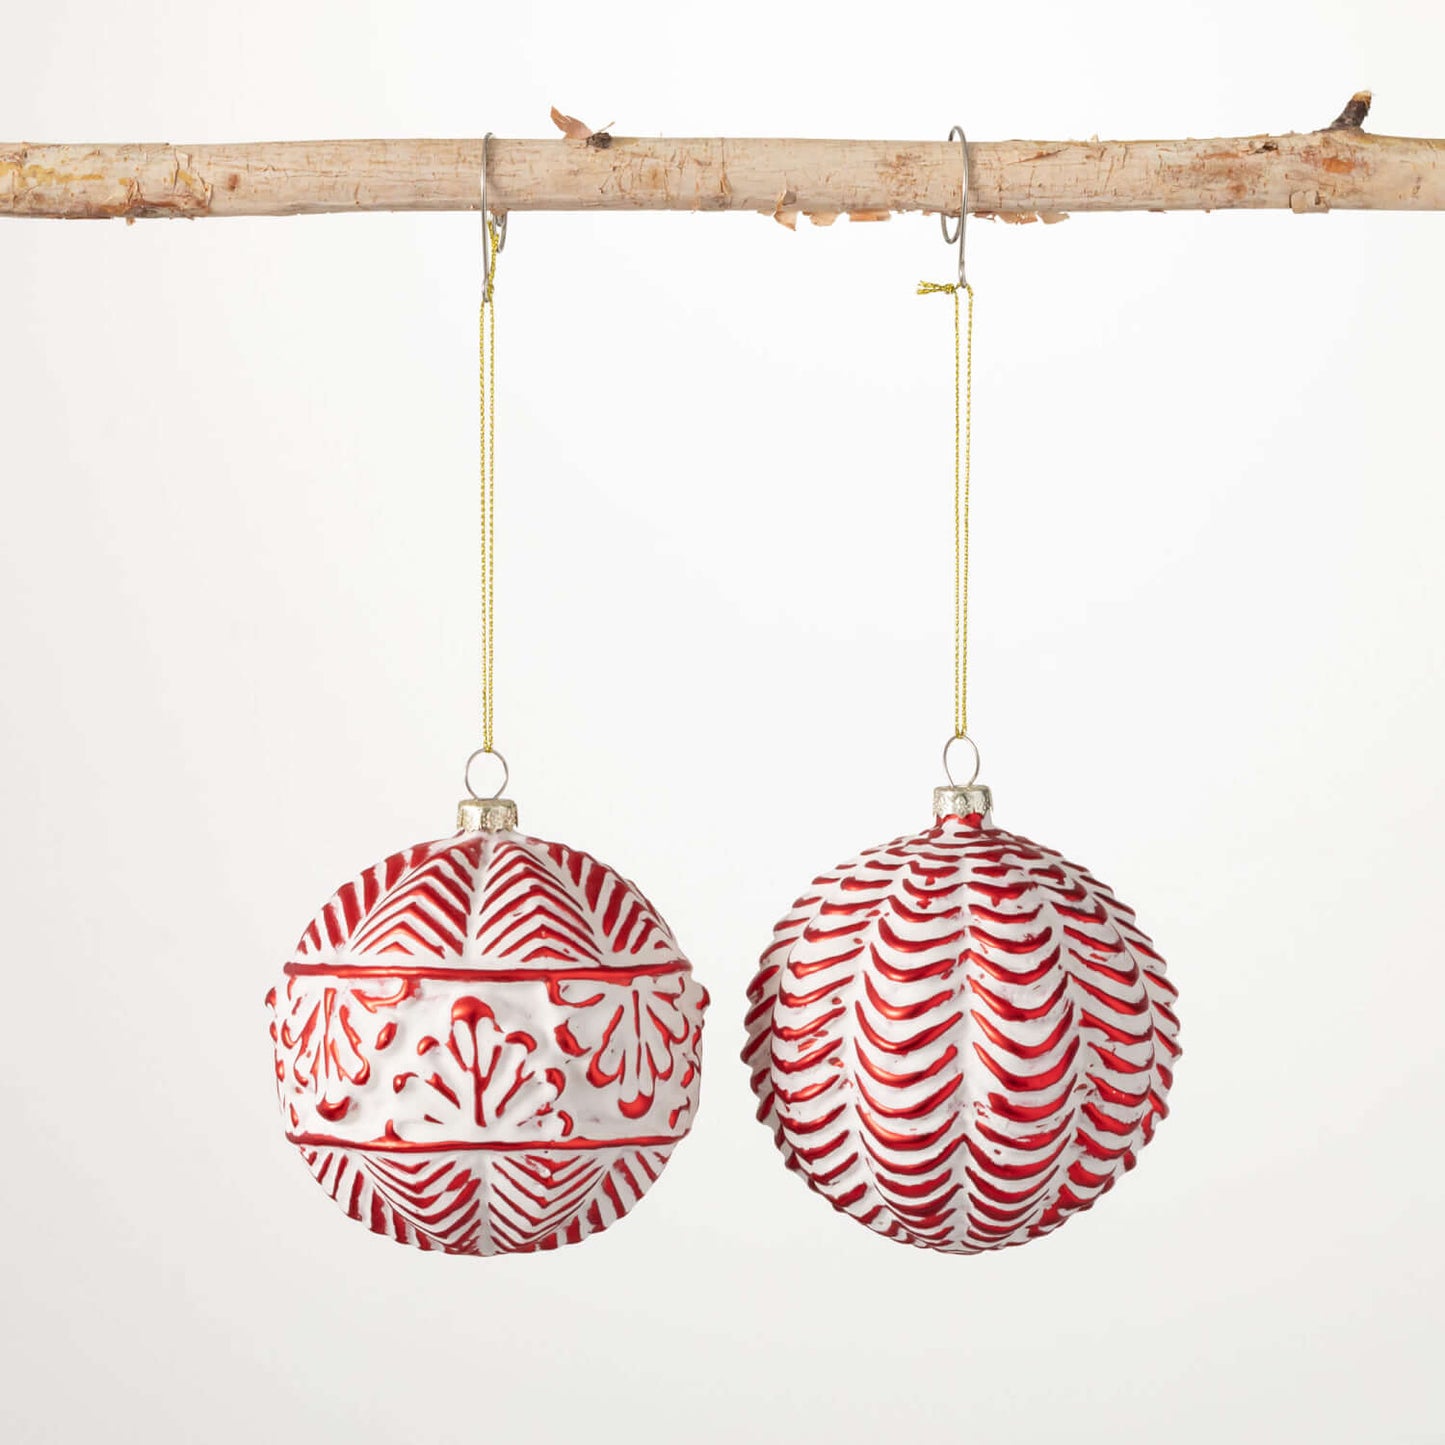 Red Embossed Ball Ornament